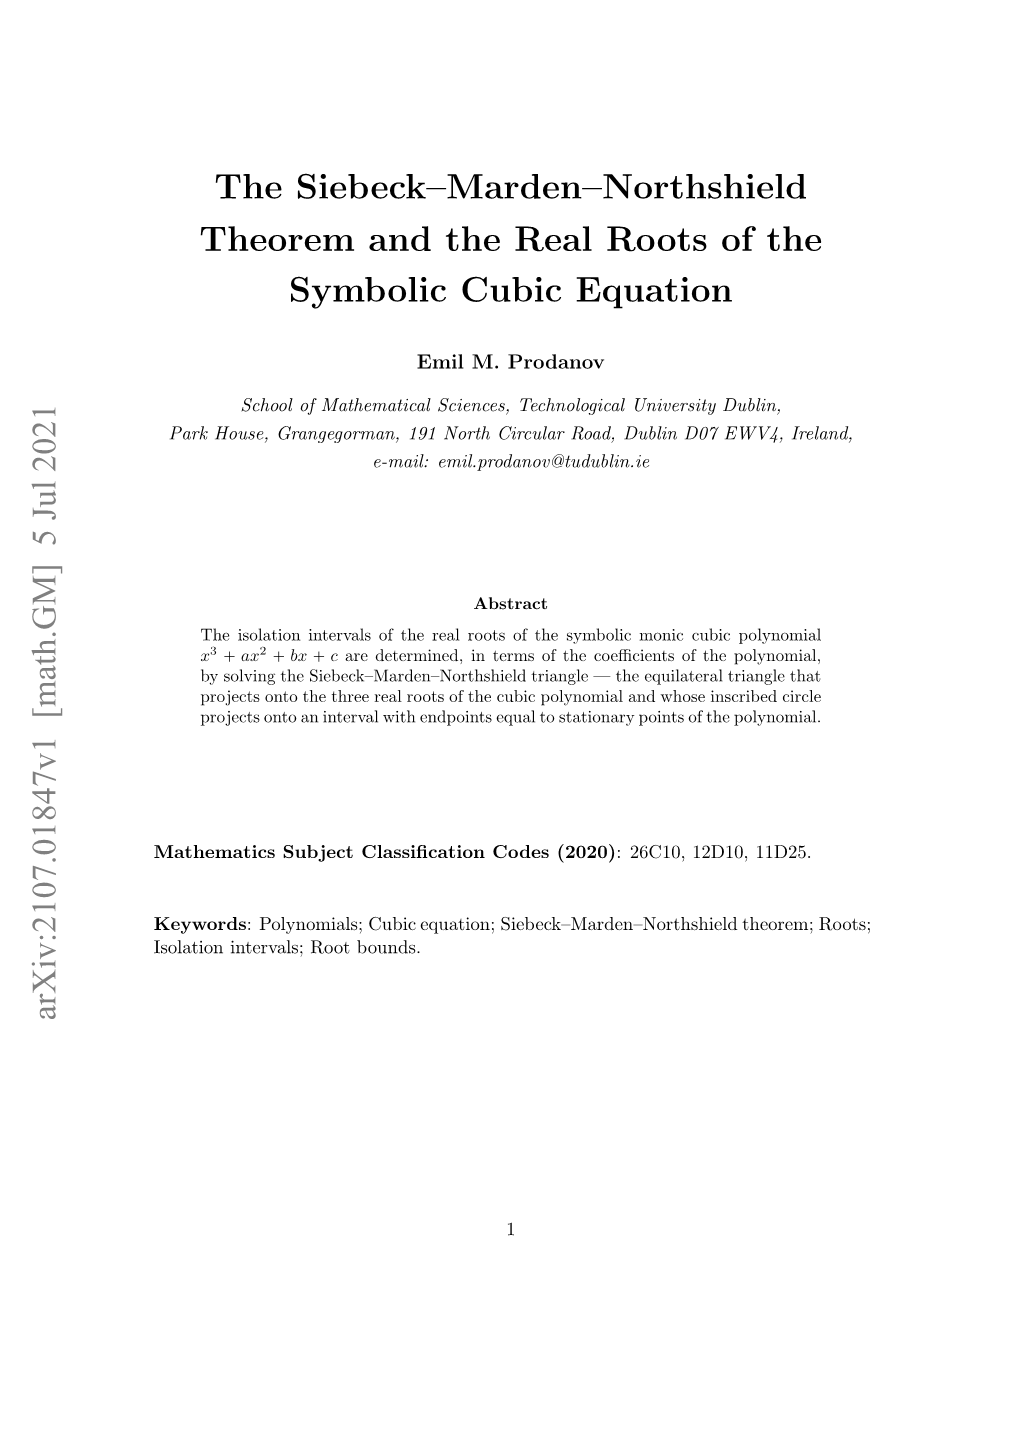 The Siebeck–Marden–Northshield Theorem and the Real Roots